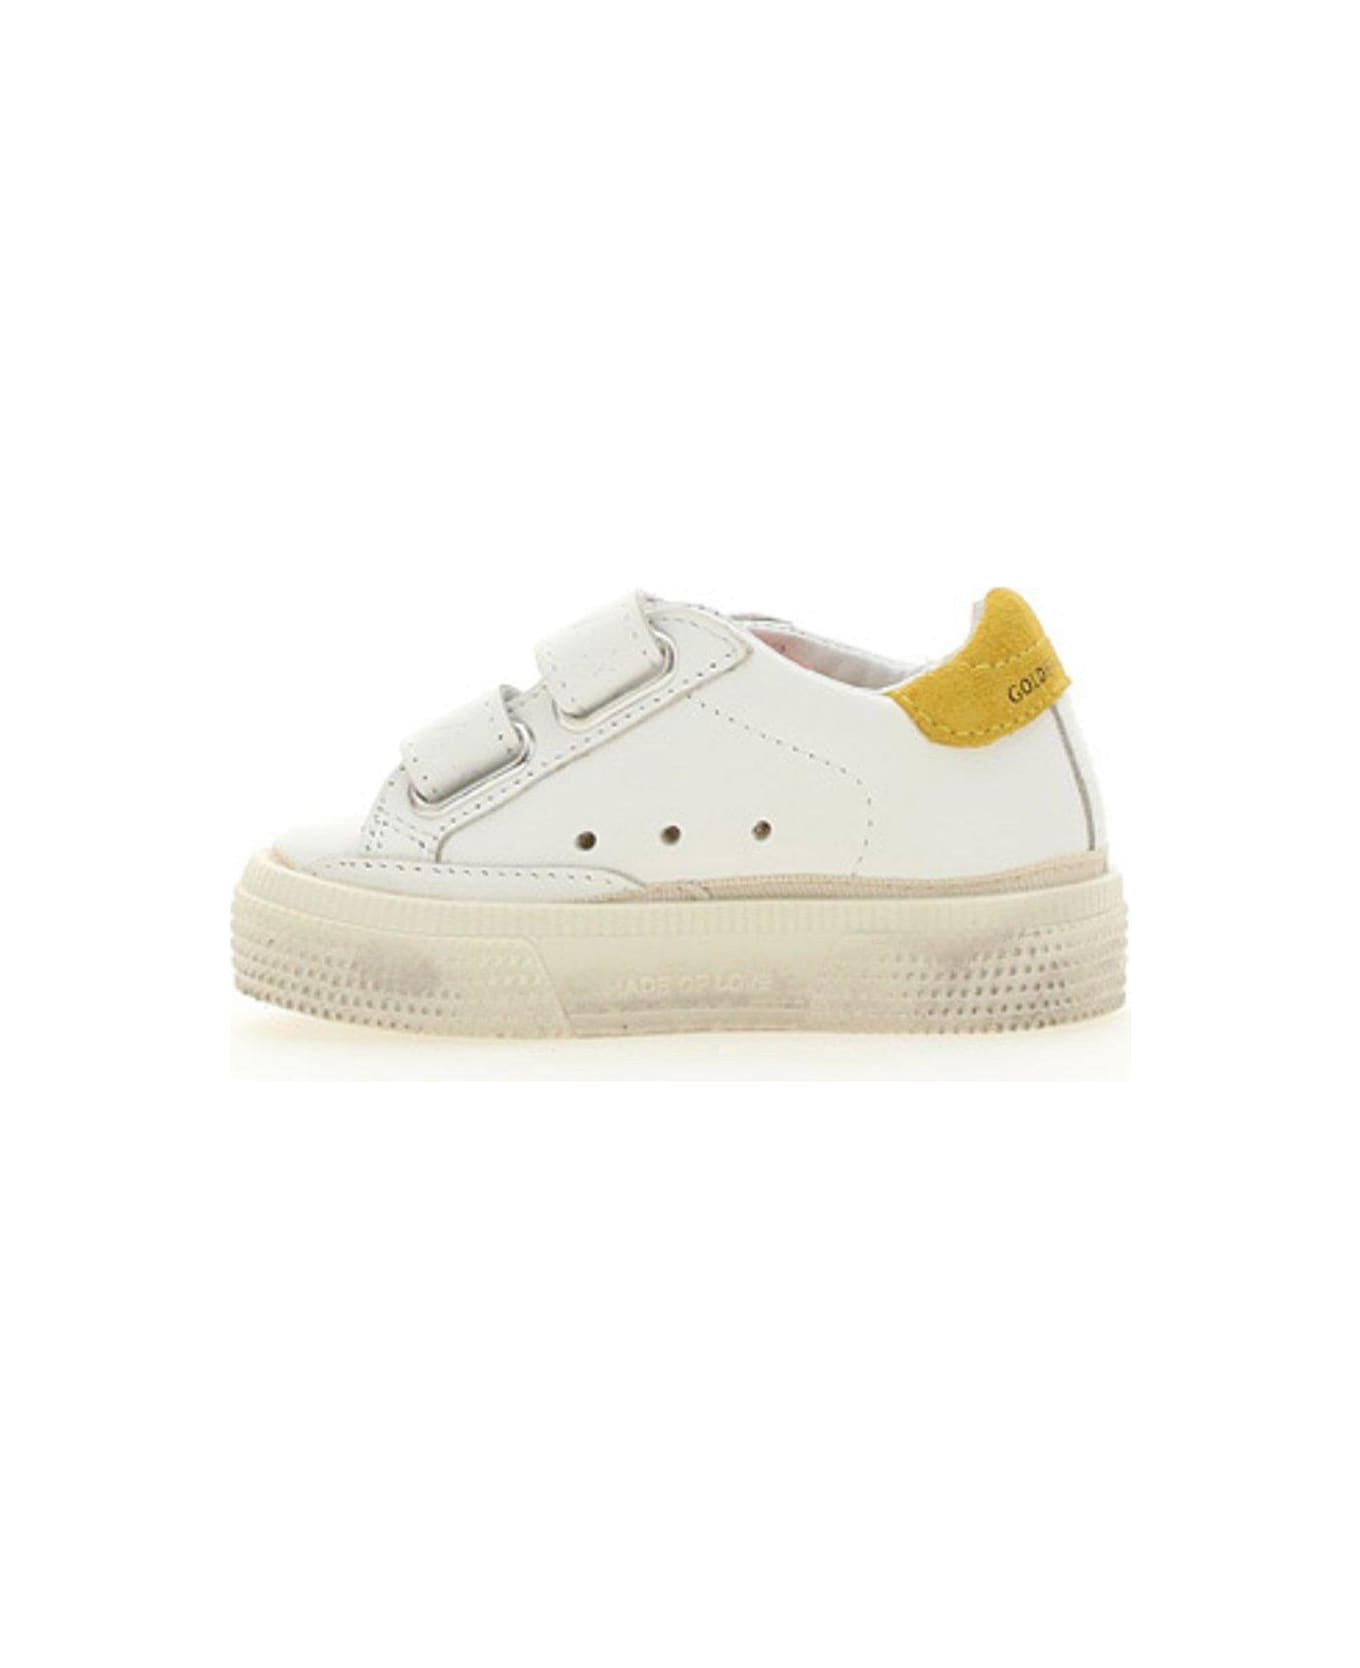 Golden Goose Super Star Touch-strap Sneakers - White/blue/mustard